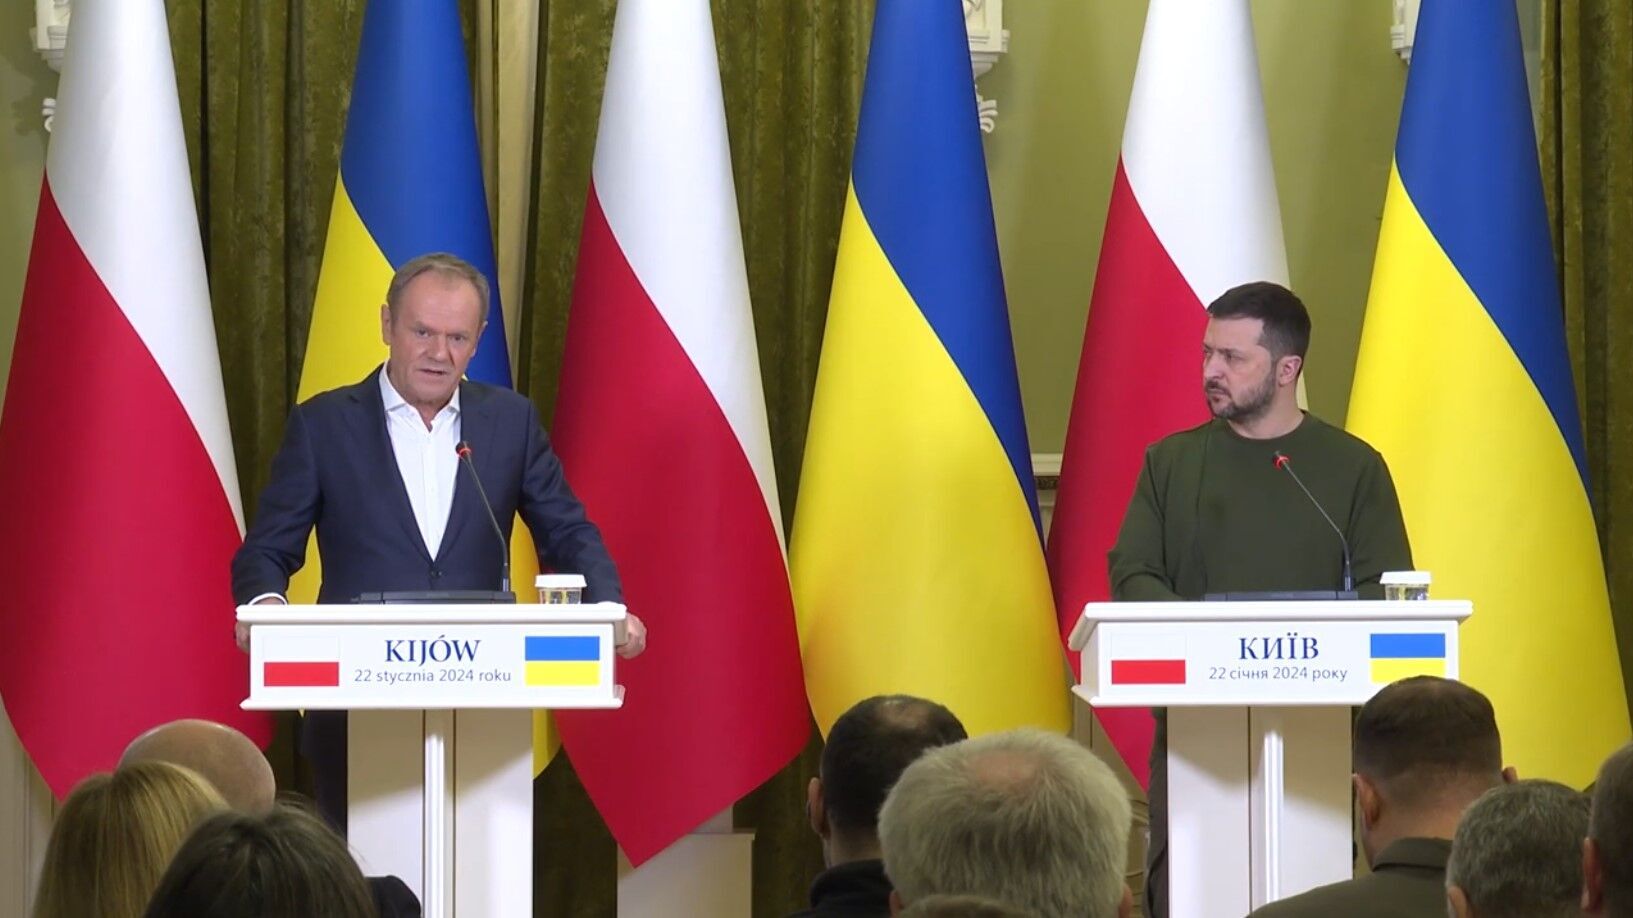 Poland joined G7 declaration on guarantees for Ukraine: Tusk made a statement